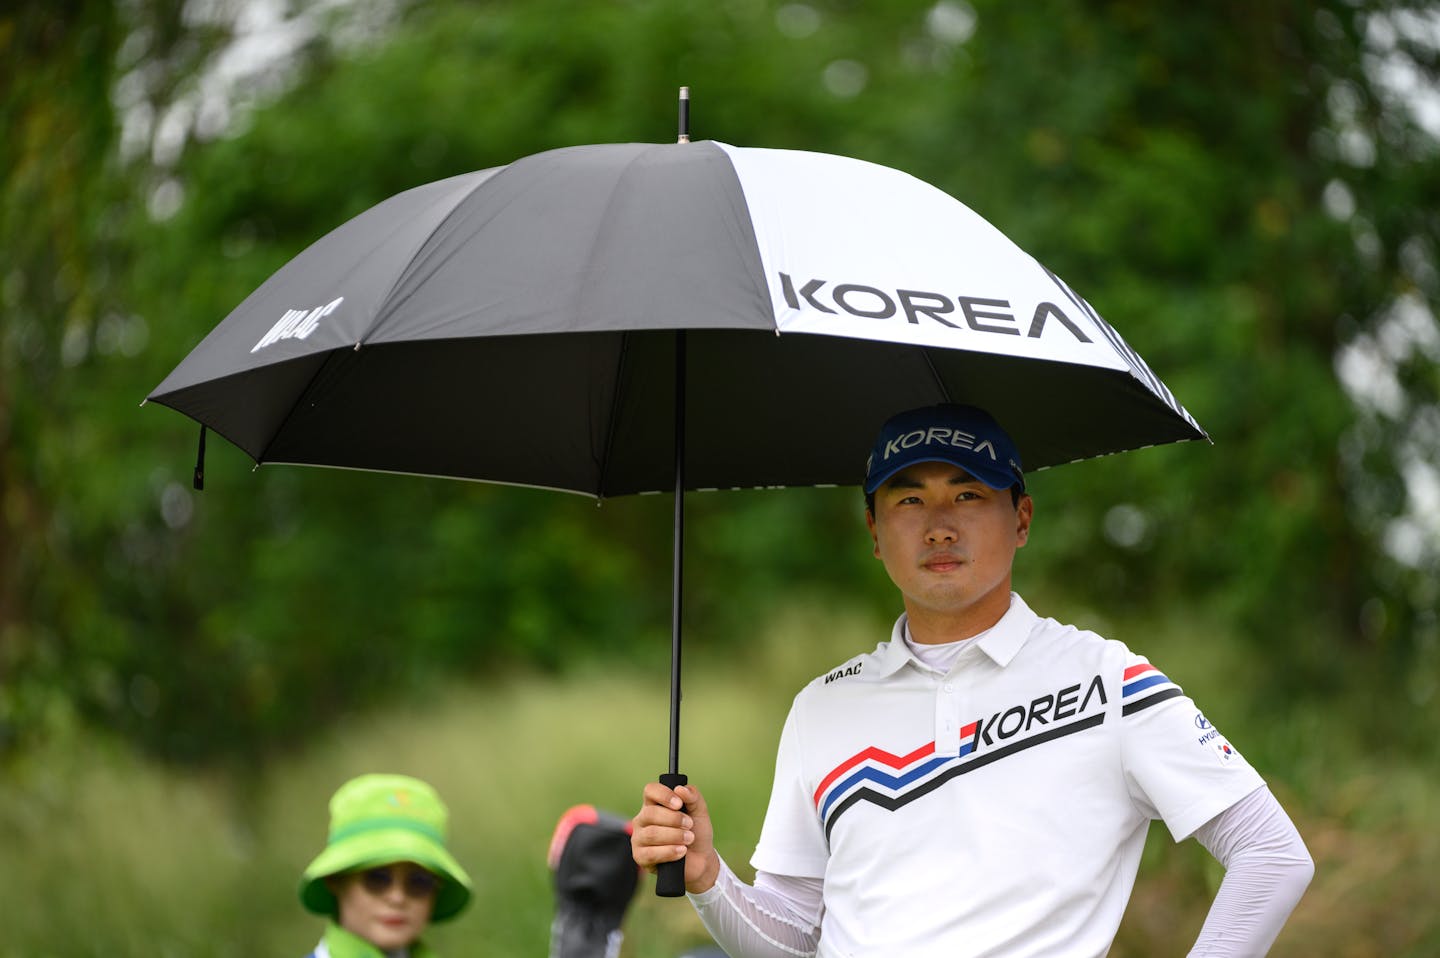 Wooyoung Cho of Korea shelters under an umbrella